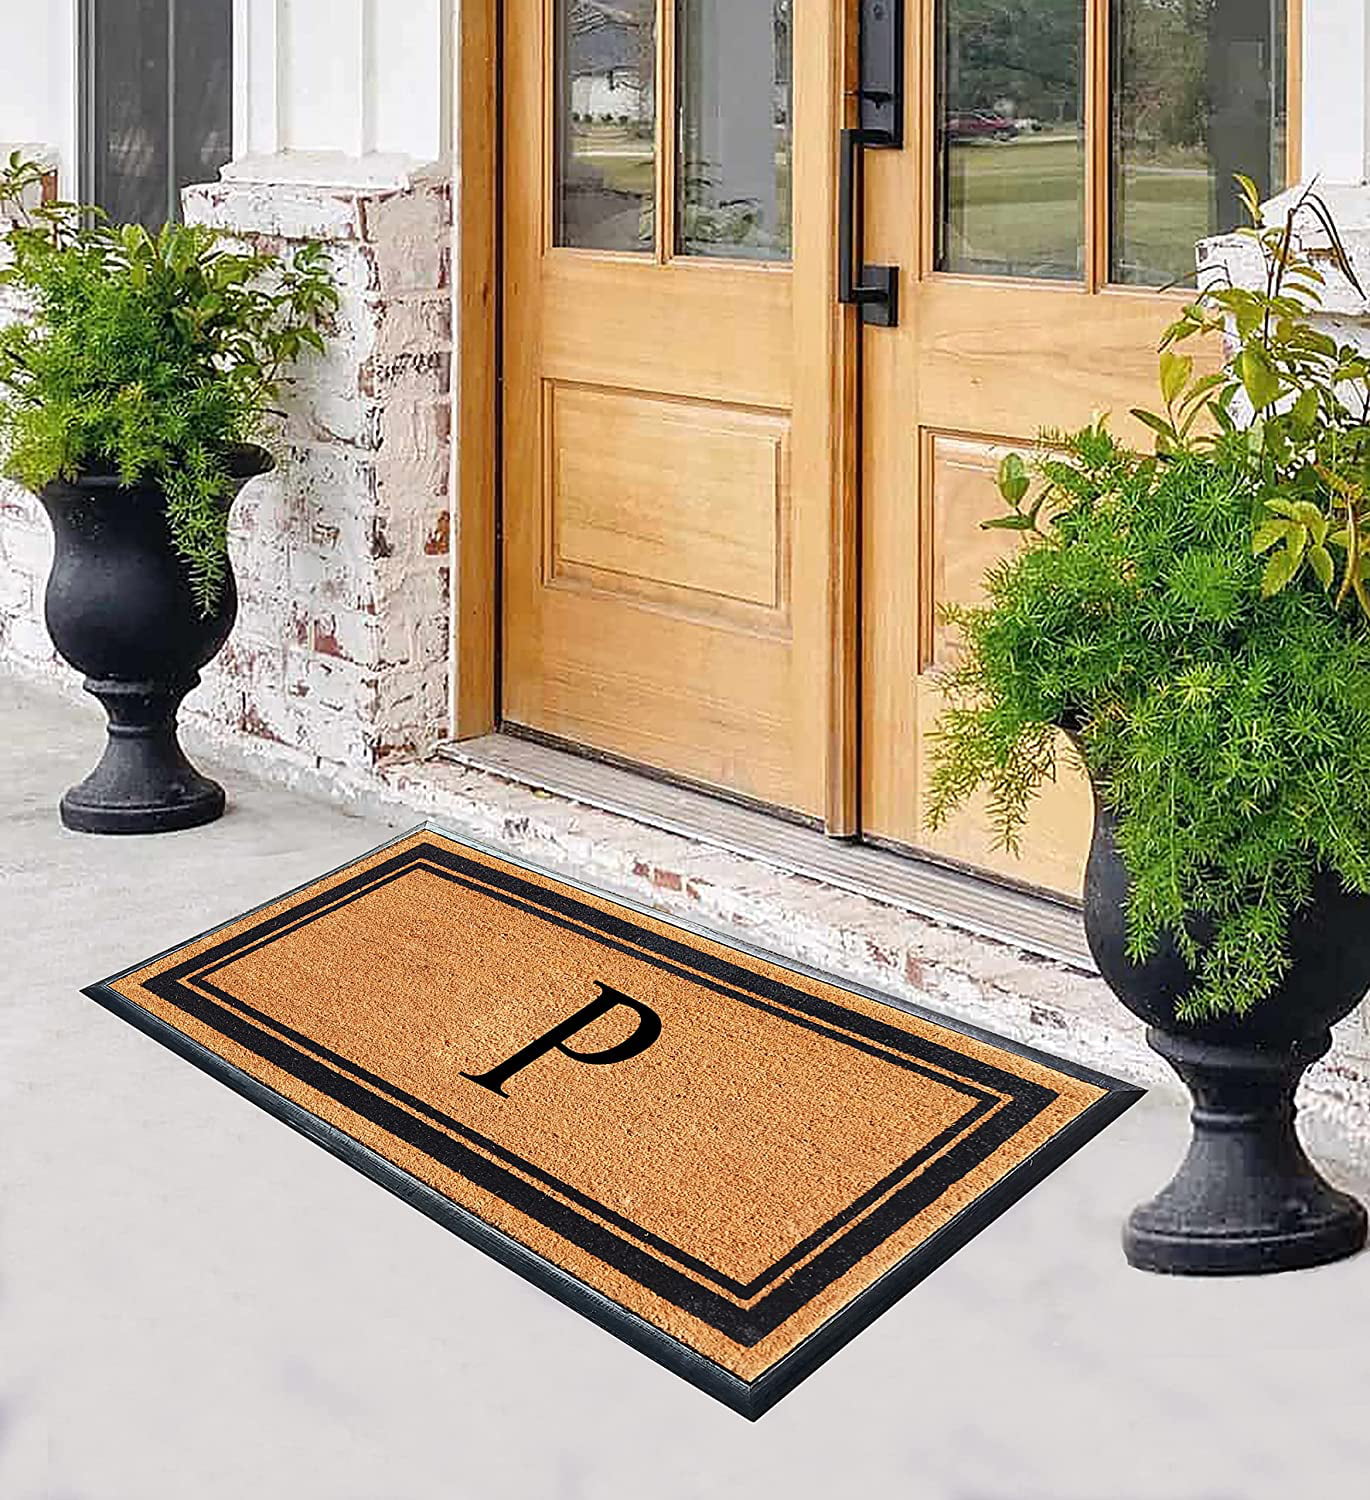 Armie Large Door Mat, Natural Rubber, Ideal for An Entryway, 30 x 48 Darby Home Co